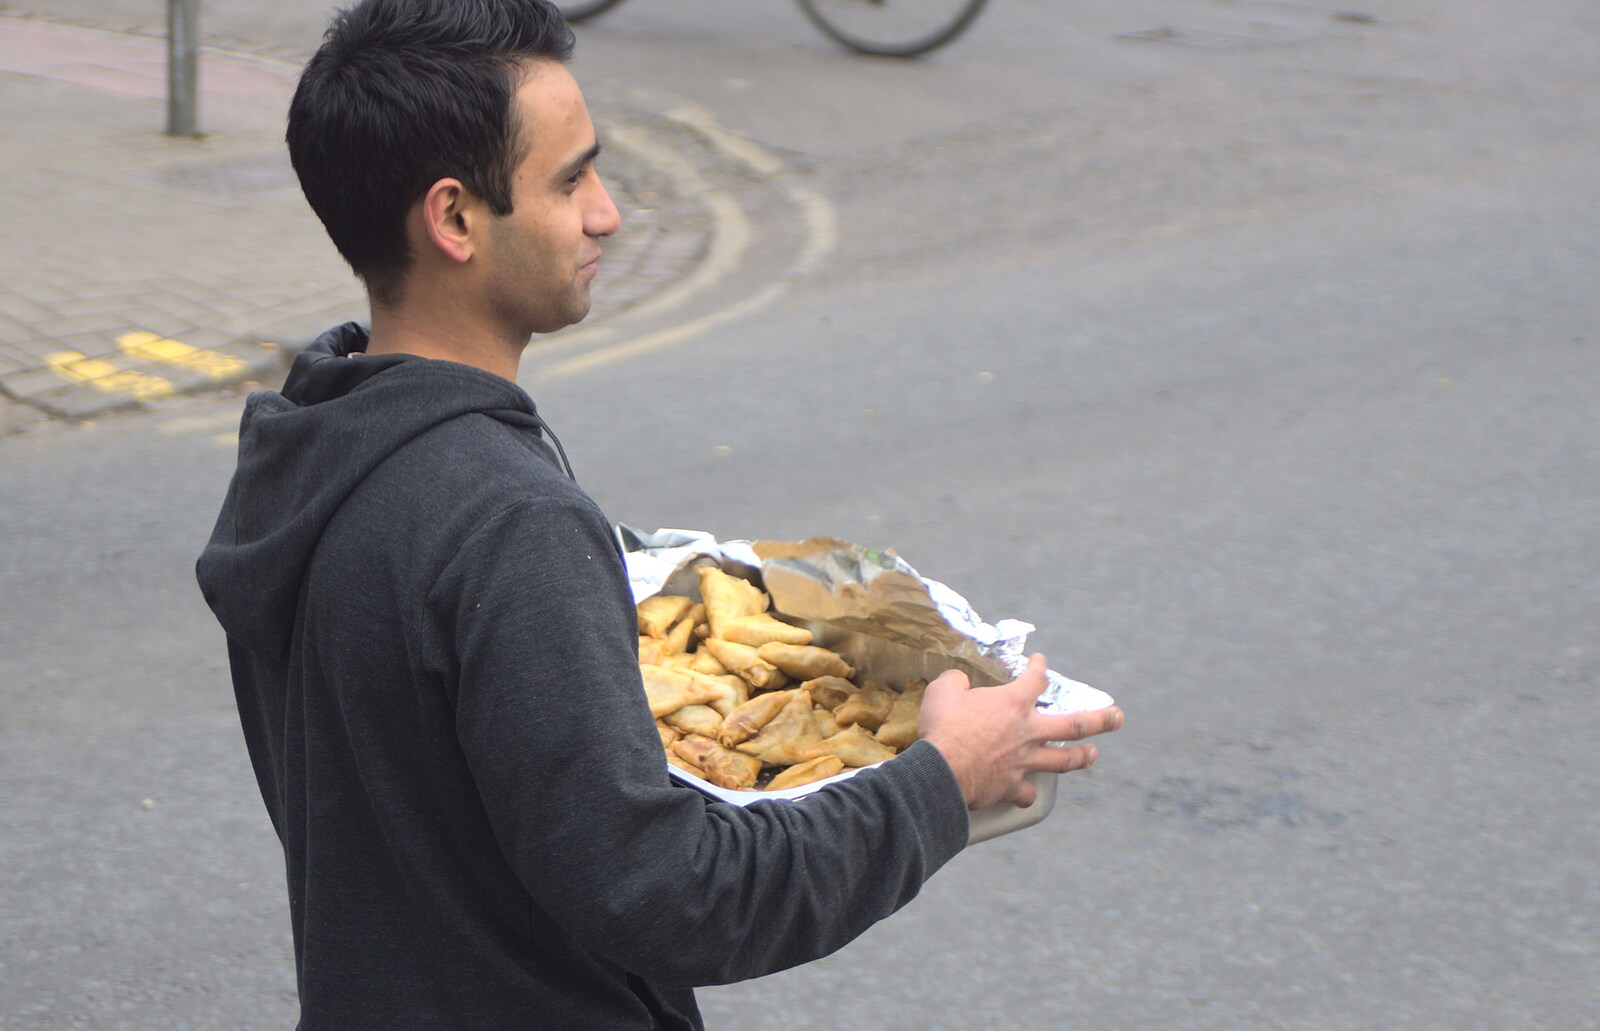 A dude passes samosas around from An Anti-Fascist March, Mill Road, Cambridge - 23rd February 2013